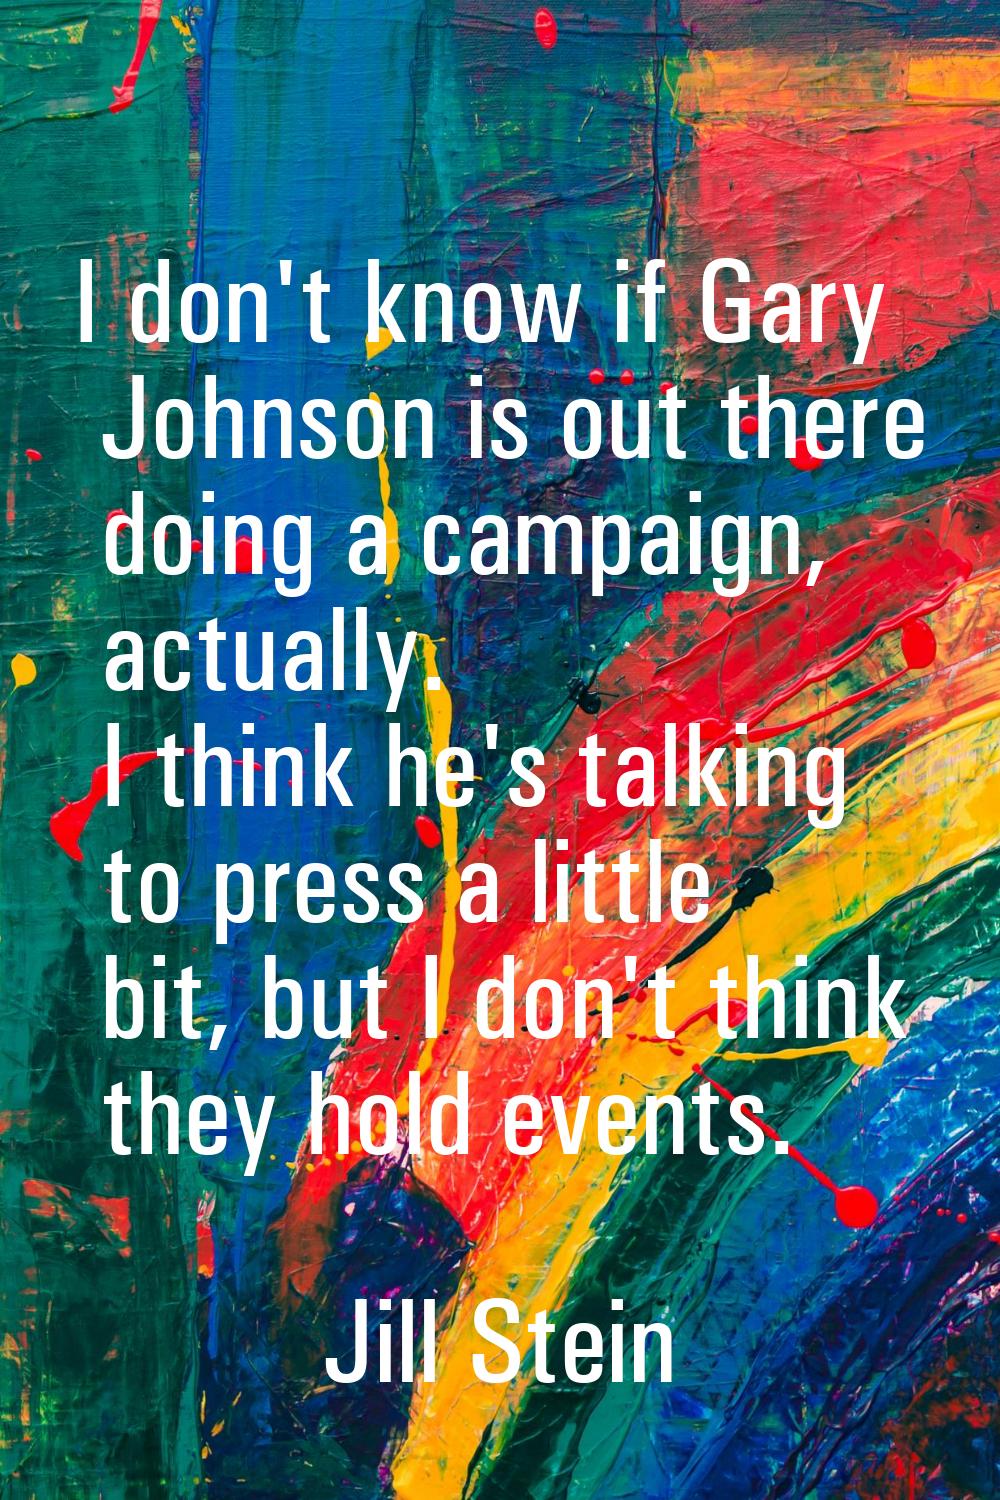 I don't know if Gary Johnson is out there doing a campaign, actually. I think he's talking to press